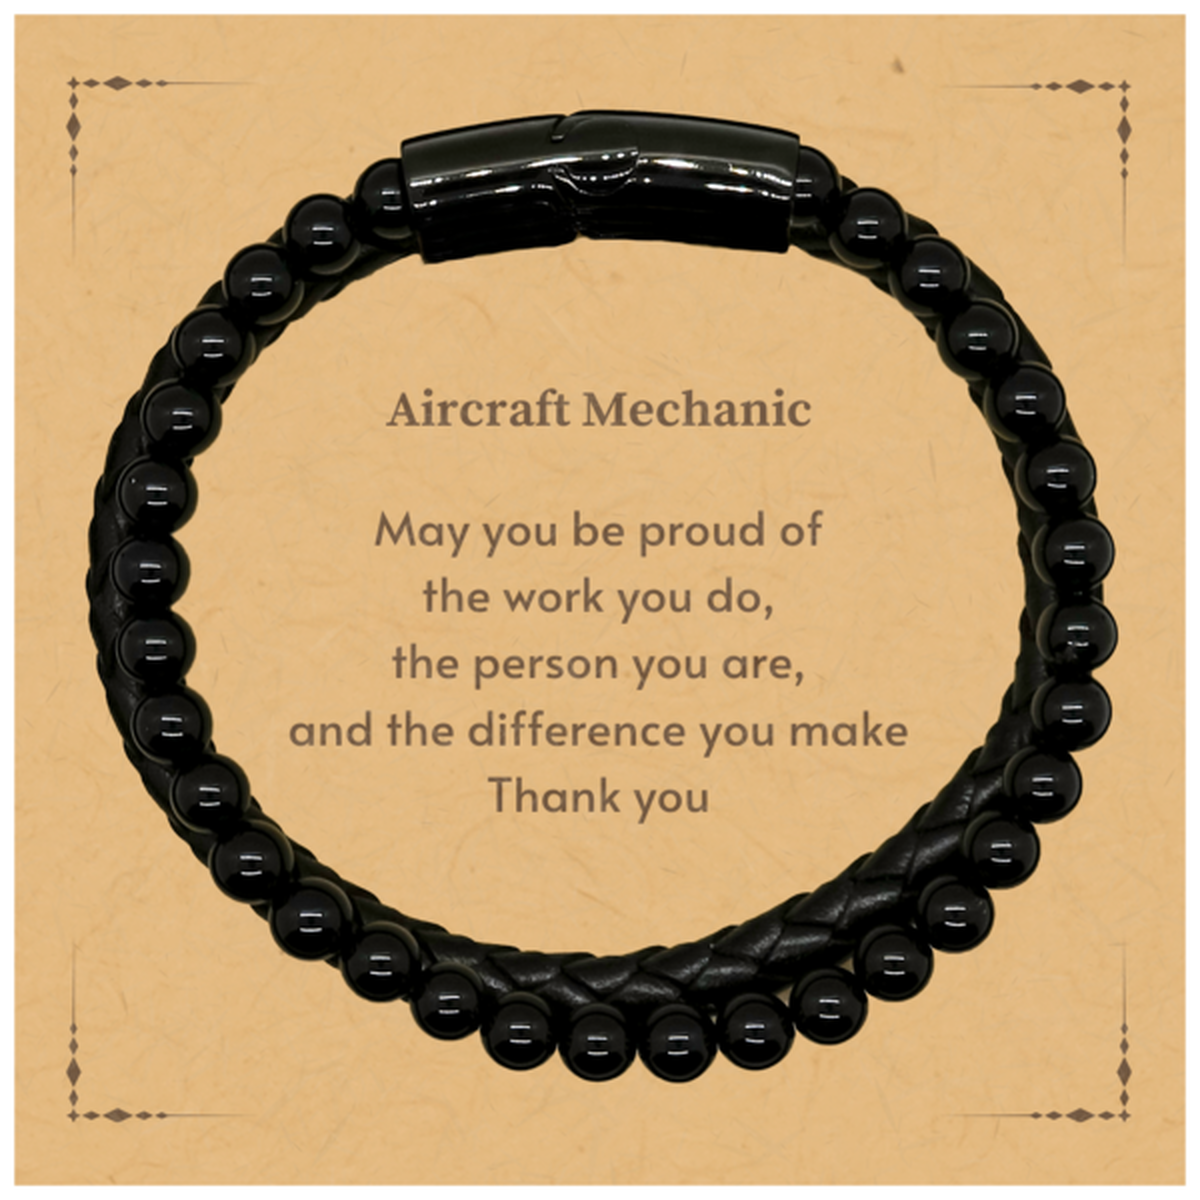 Heartwarming Stone Leather Bracelets Retirement Coworkers Gifts for Aircraft Mechanic, Aircraft Mechanic May You be proud of the work you do, the person you are Gifts for Boss Men Women Friends